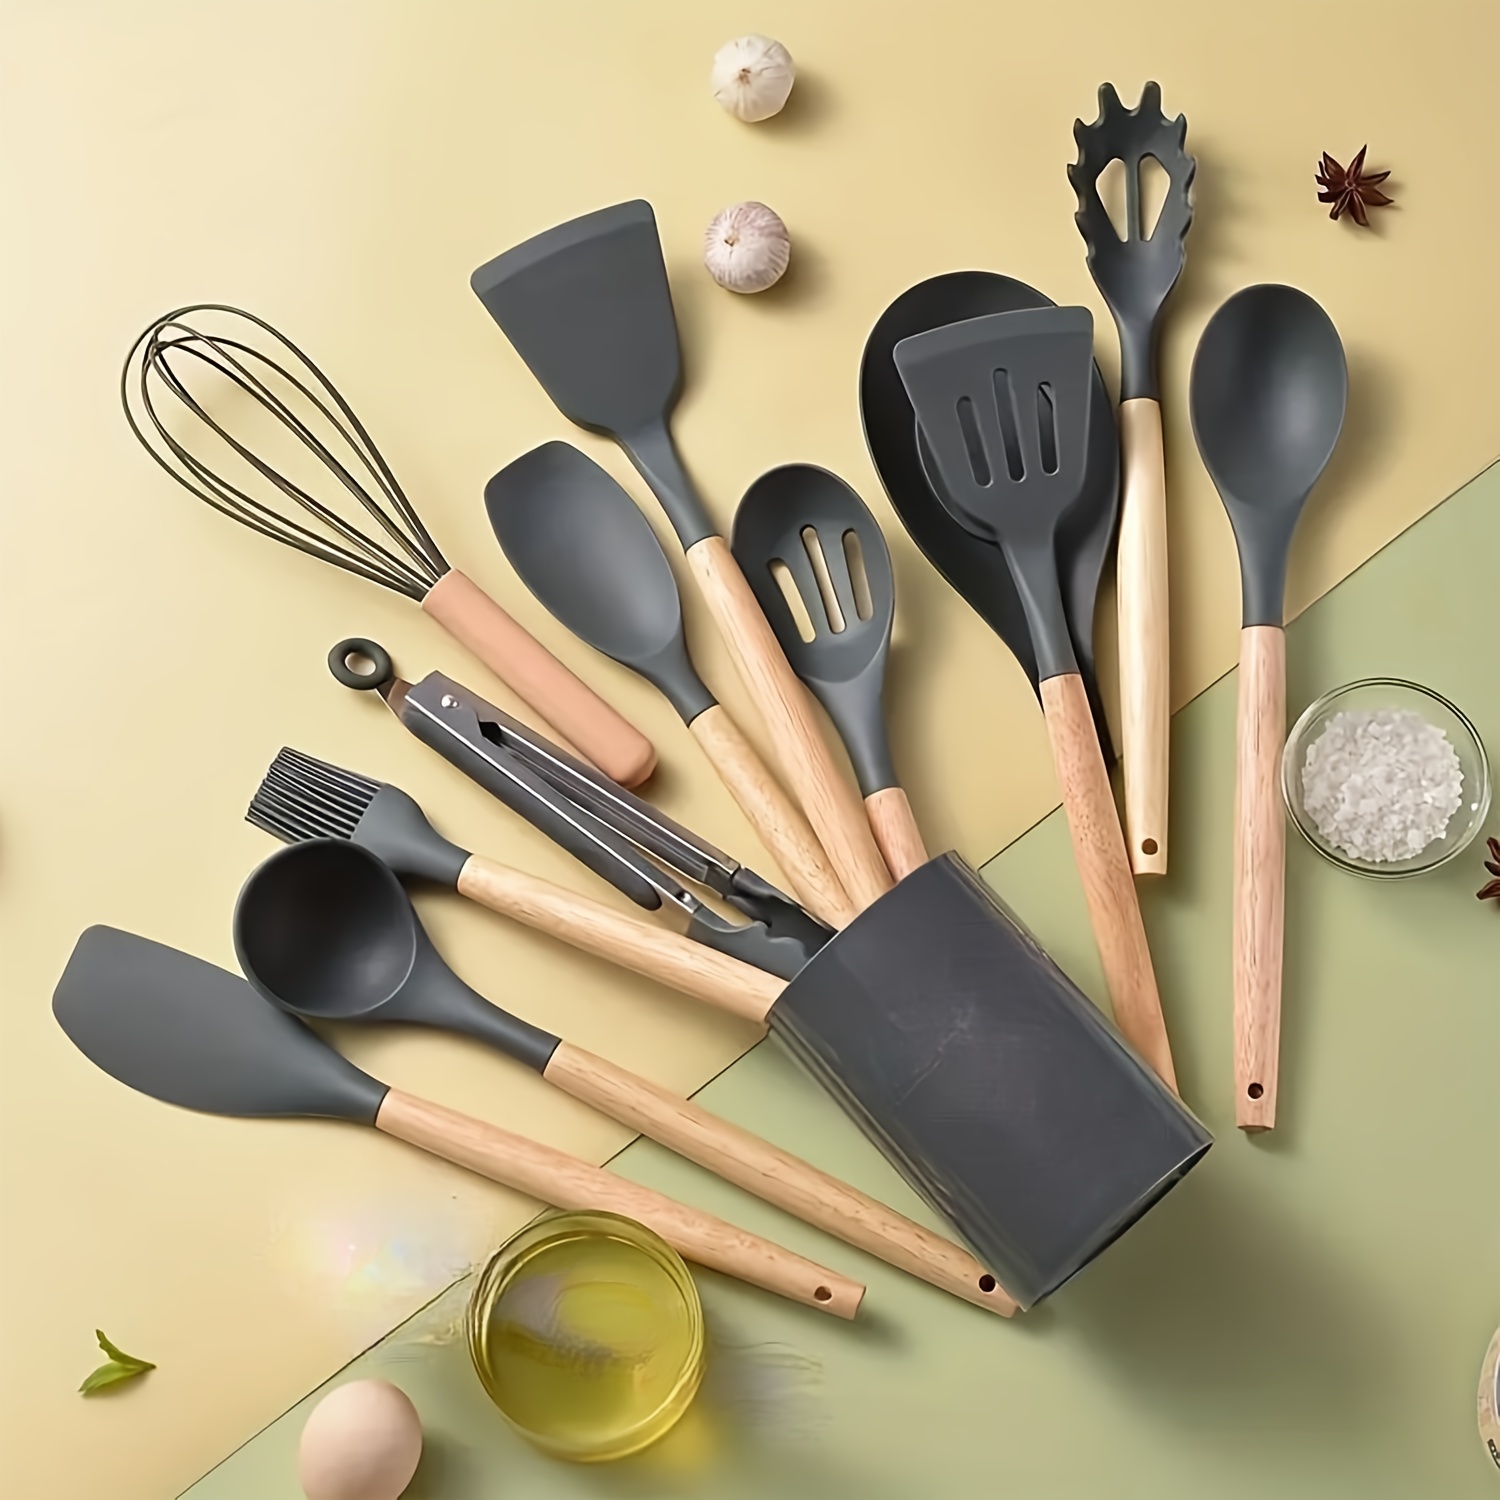 White Silicone Cooking Utensils